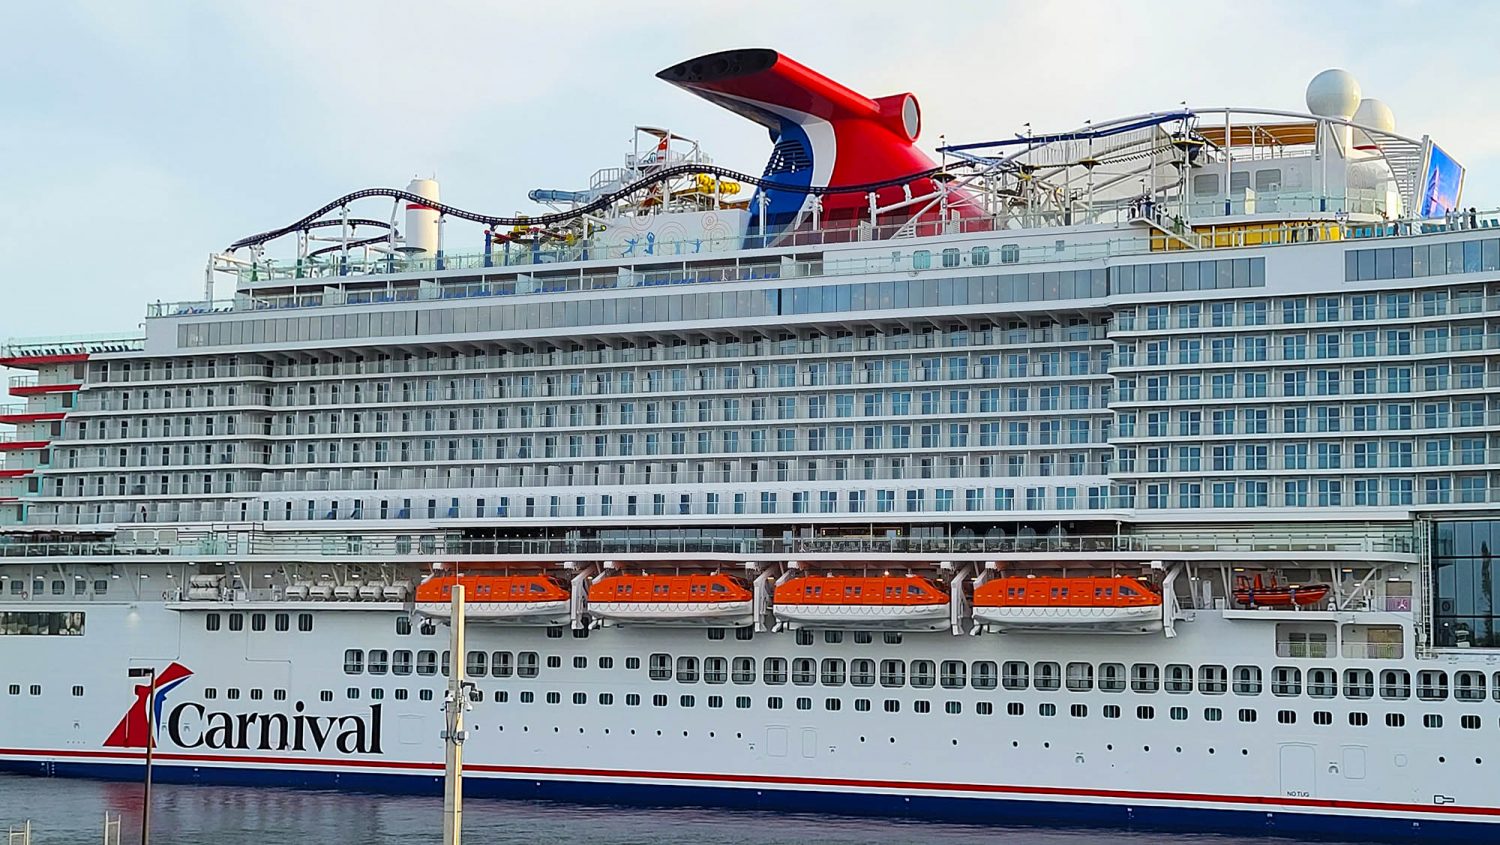 Carnival's Newest and Largest Cruise Ship Finally Debuts This Week